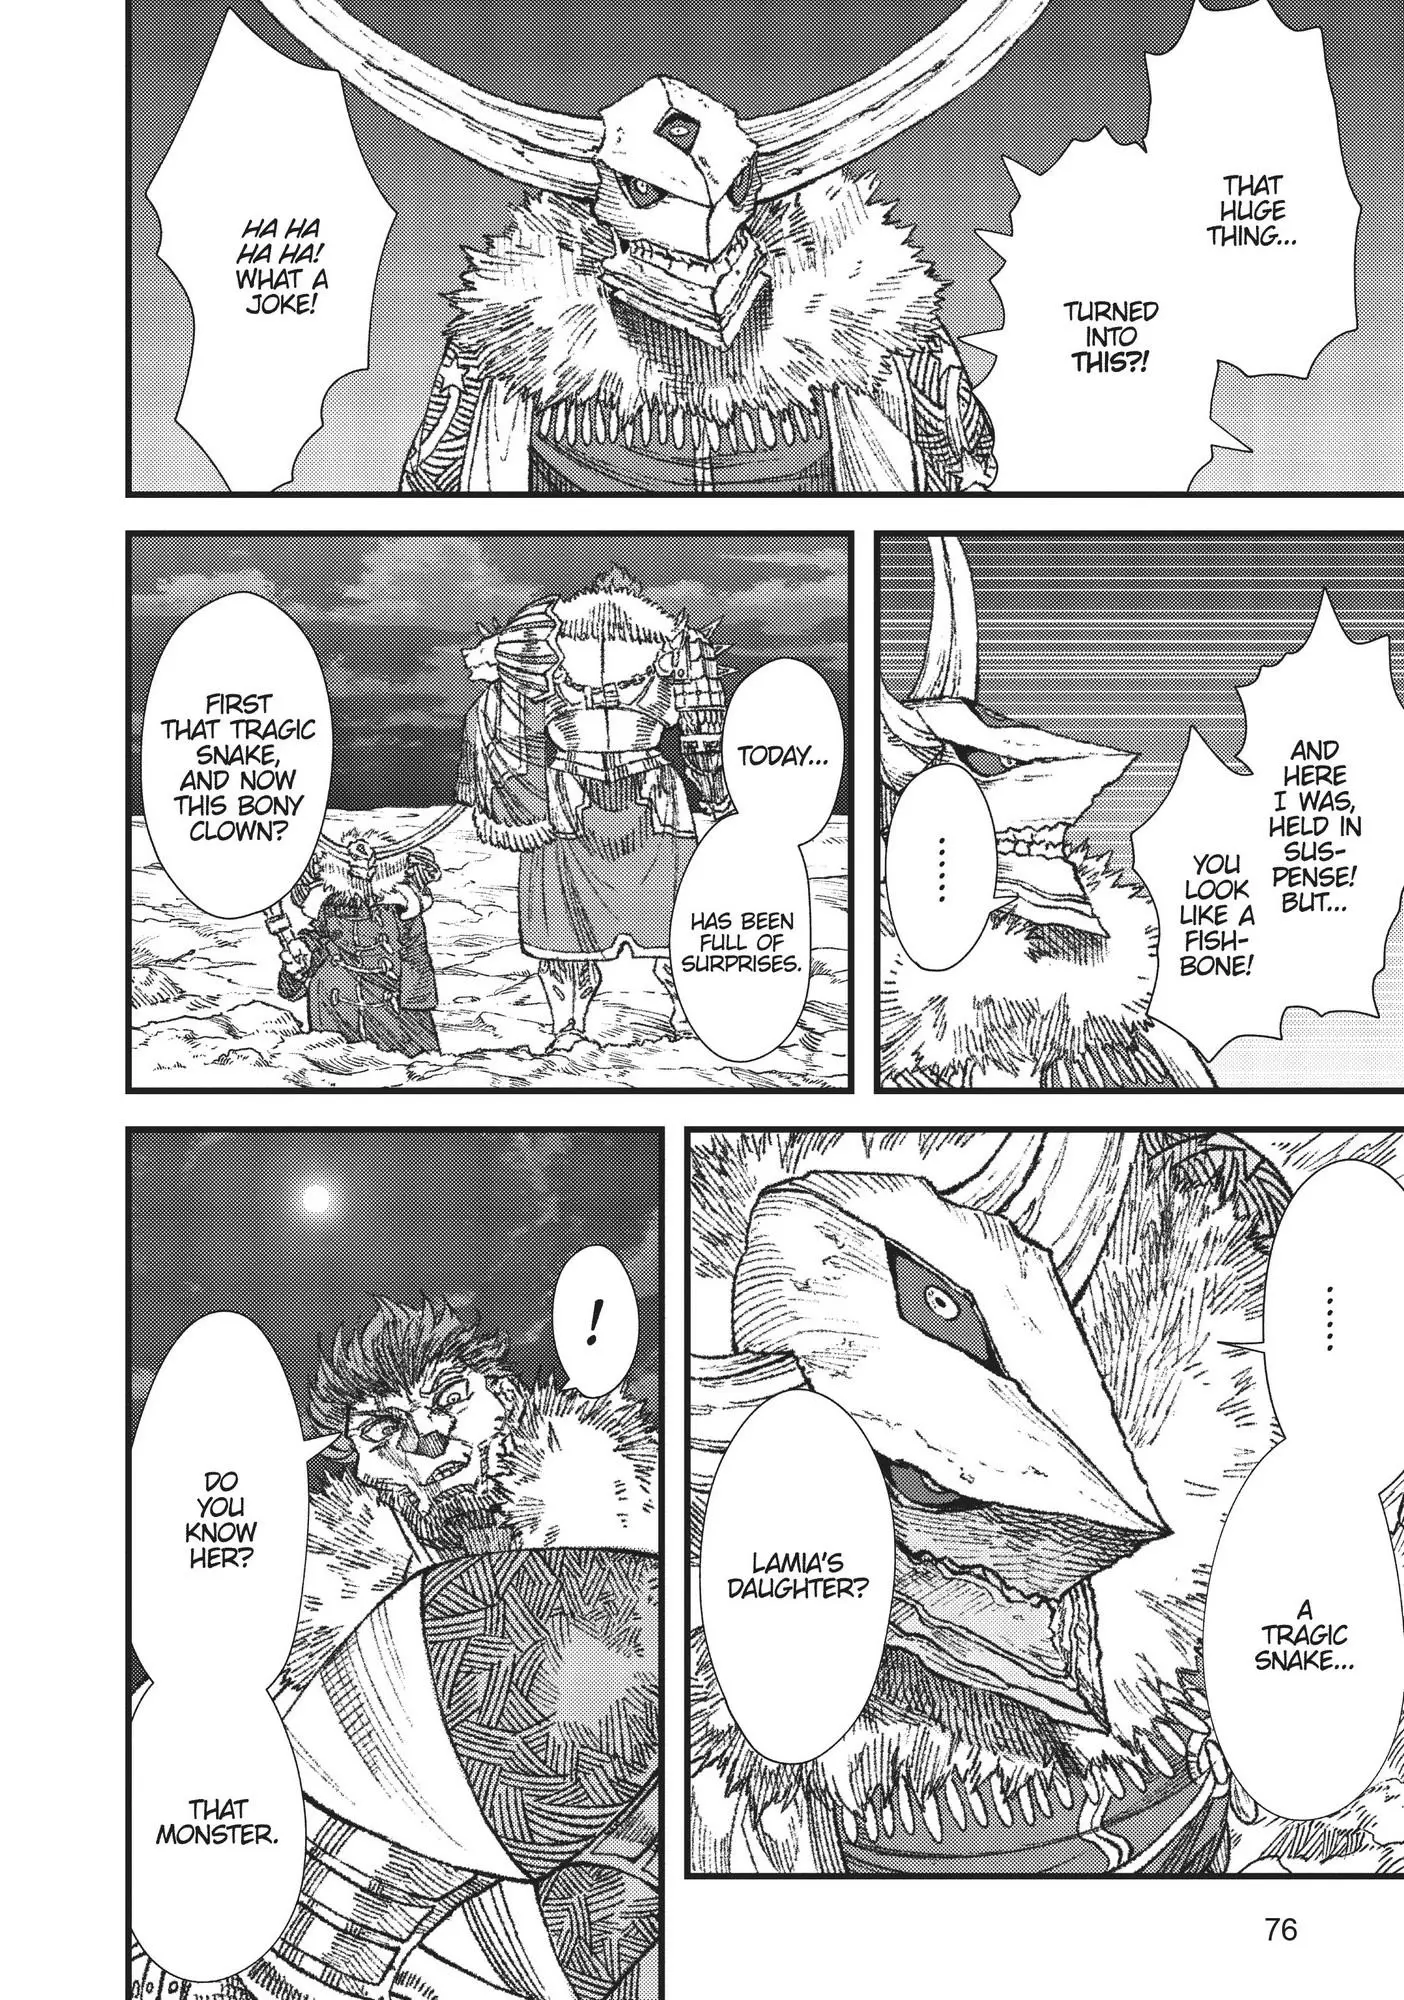 The Comeback Of The Demon King Who Formed A Demon's Guild After Being Vanquished By The Hero - 22 page 3-76776e41